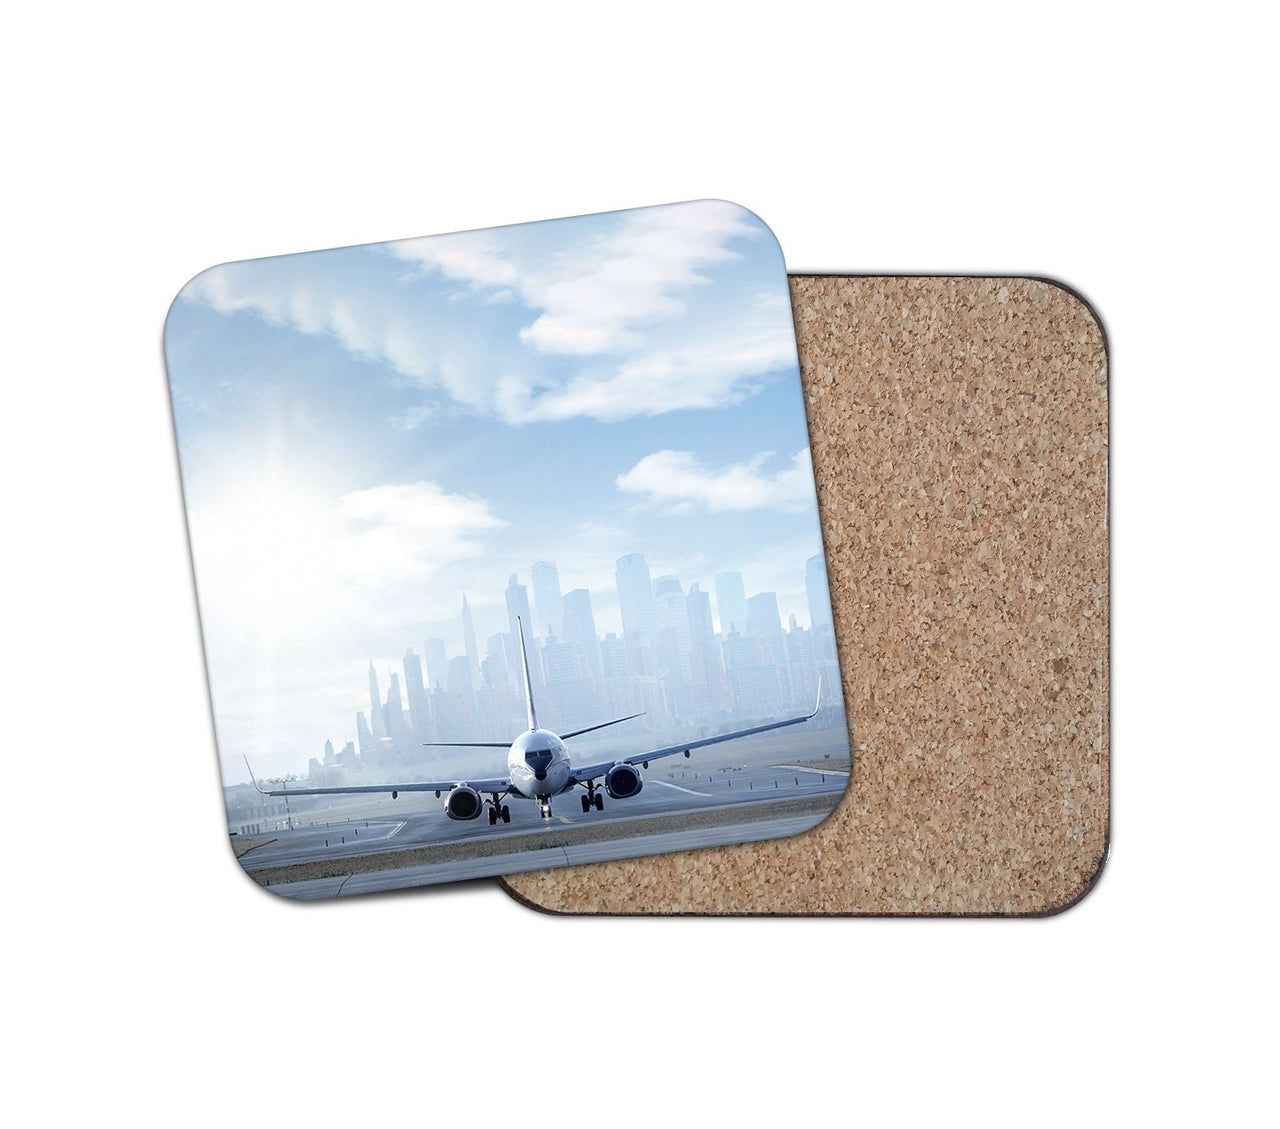 Boeing 737 & City View Behind Designed Coasters